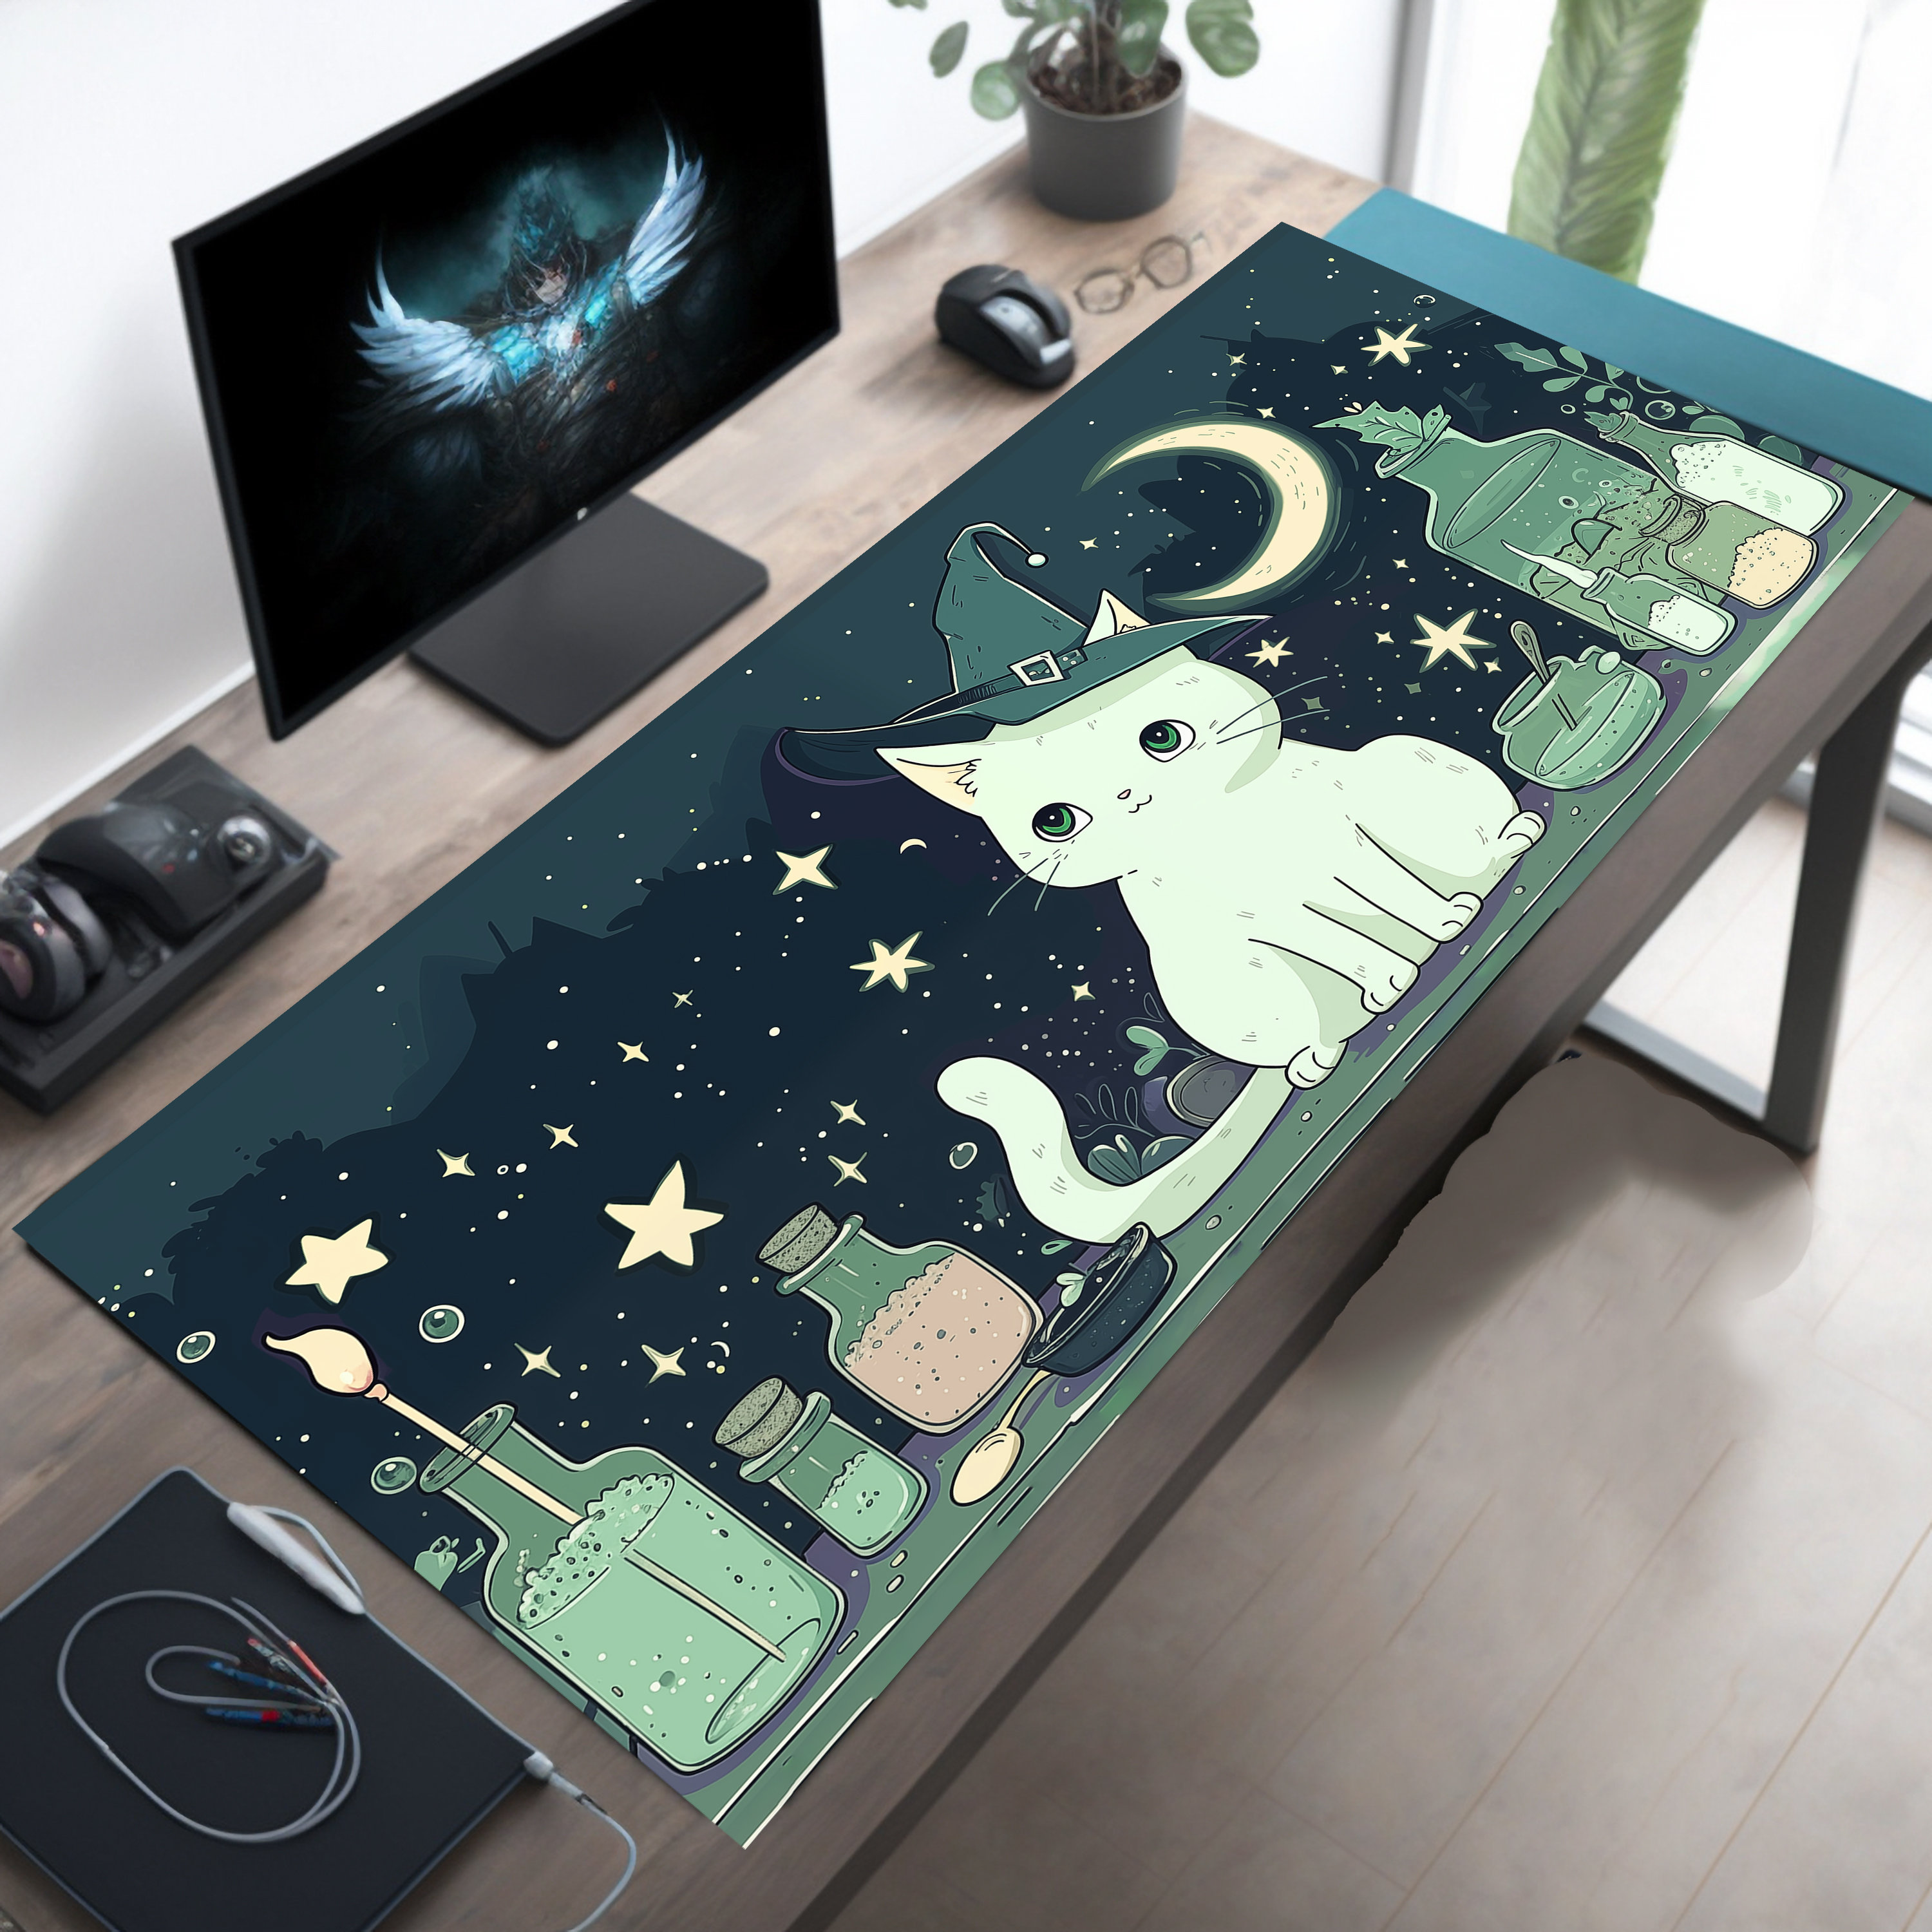 Kitty Mouse Pad 